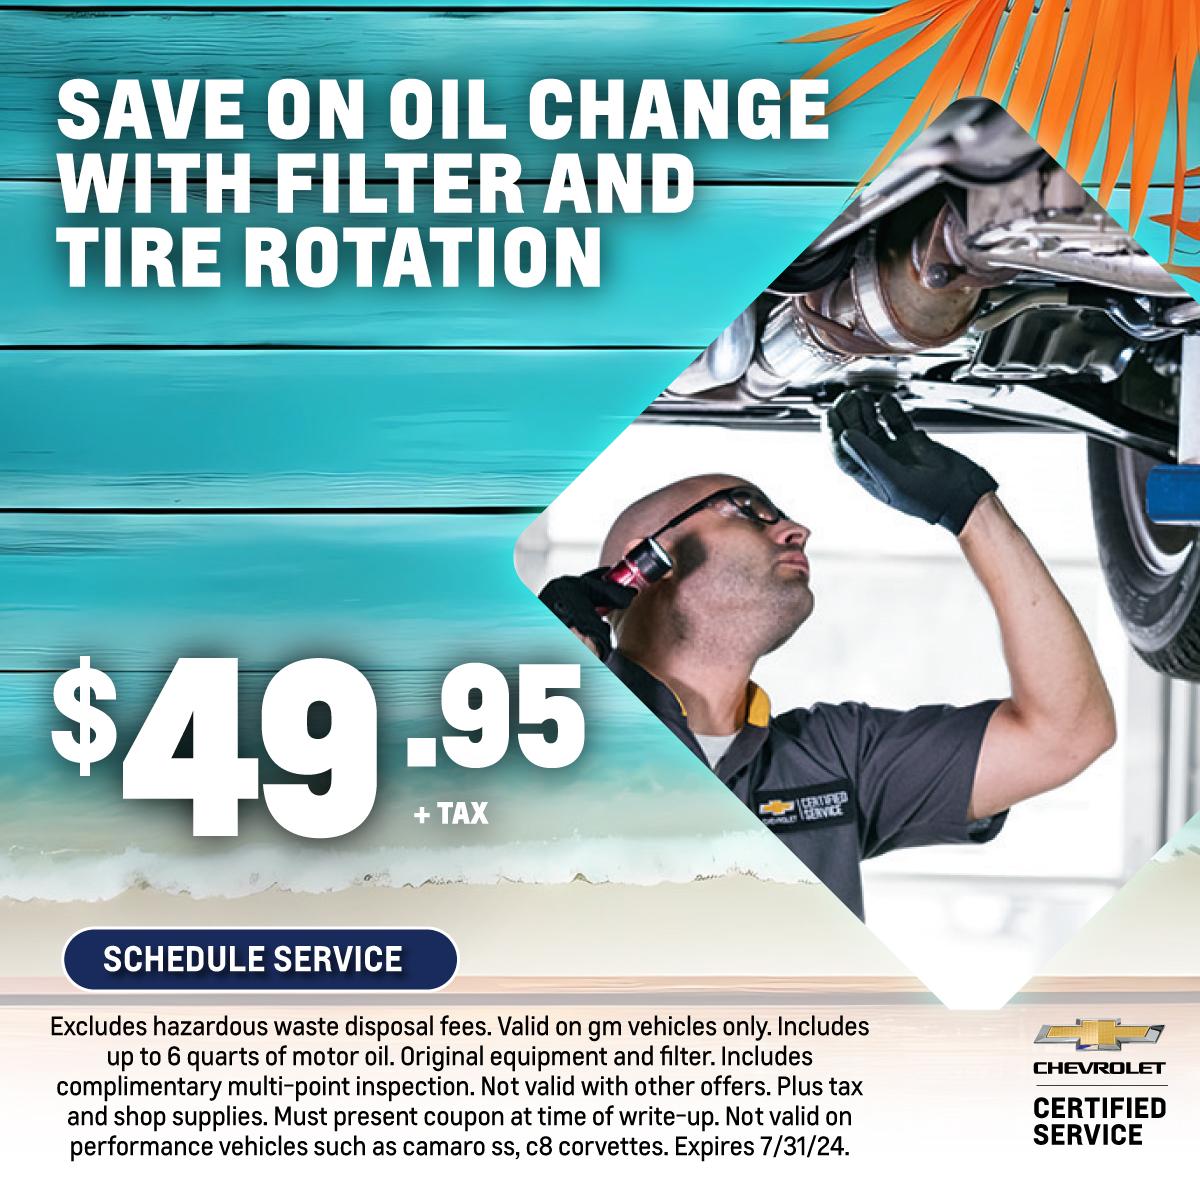 Save on oil changes with filter and tire rotation